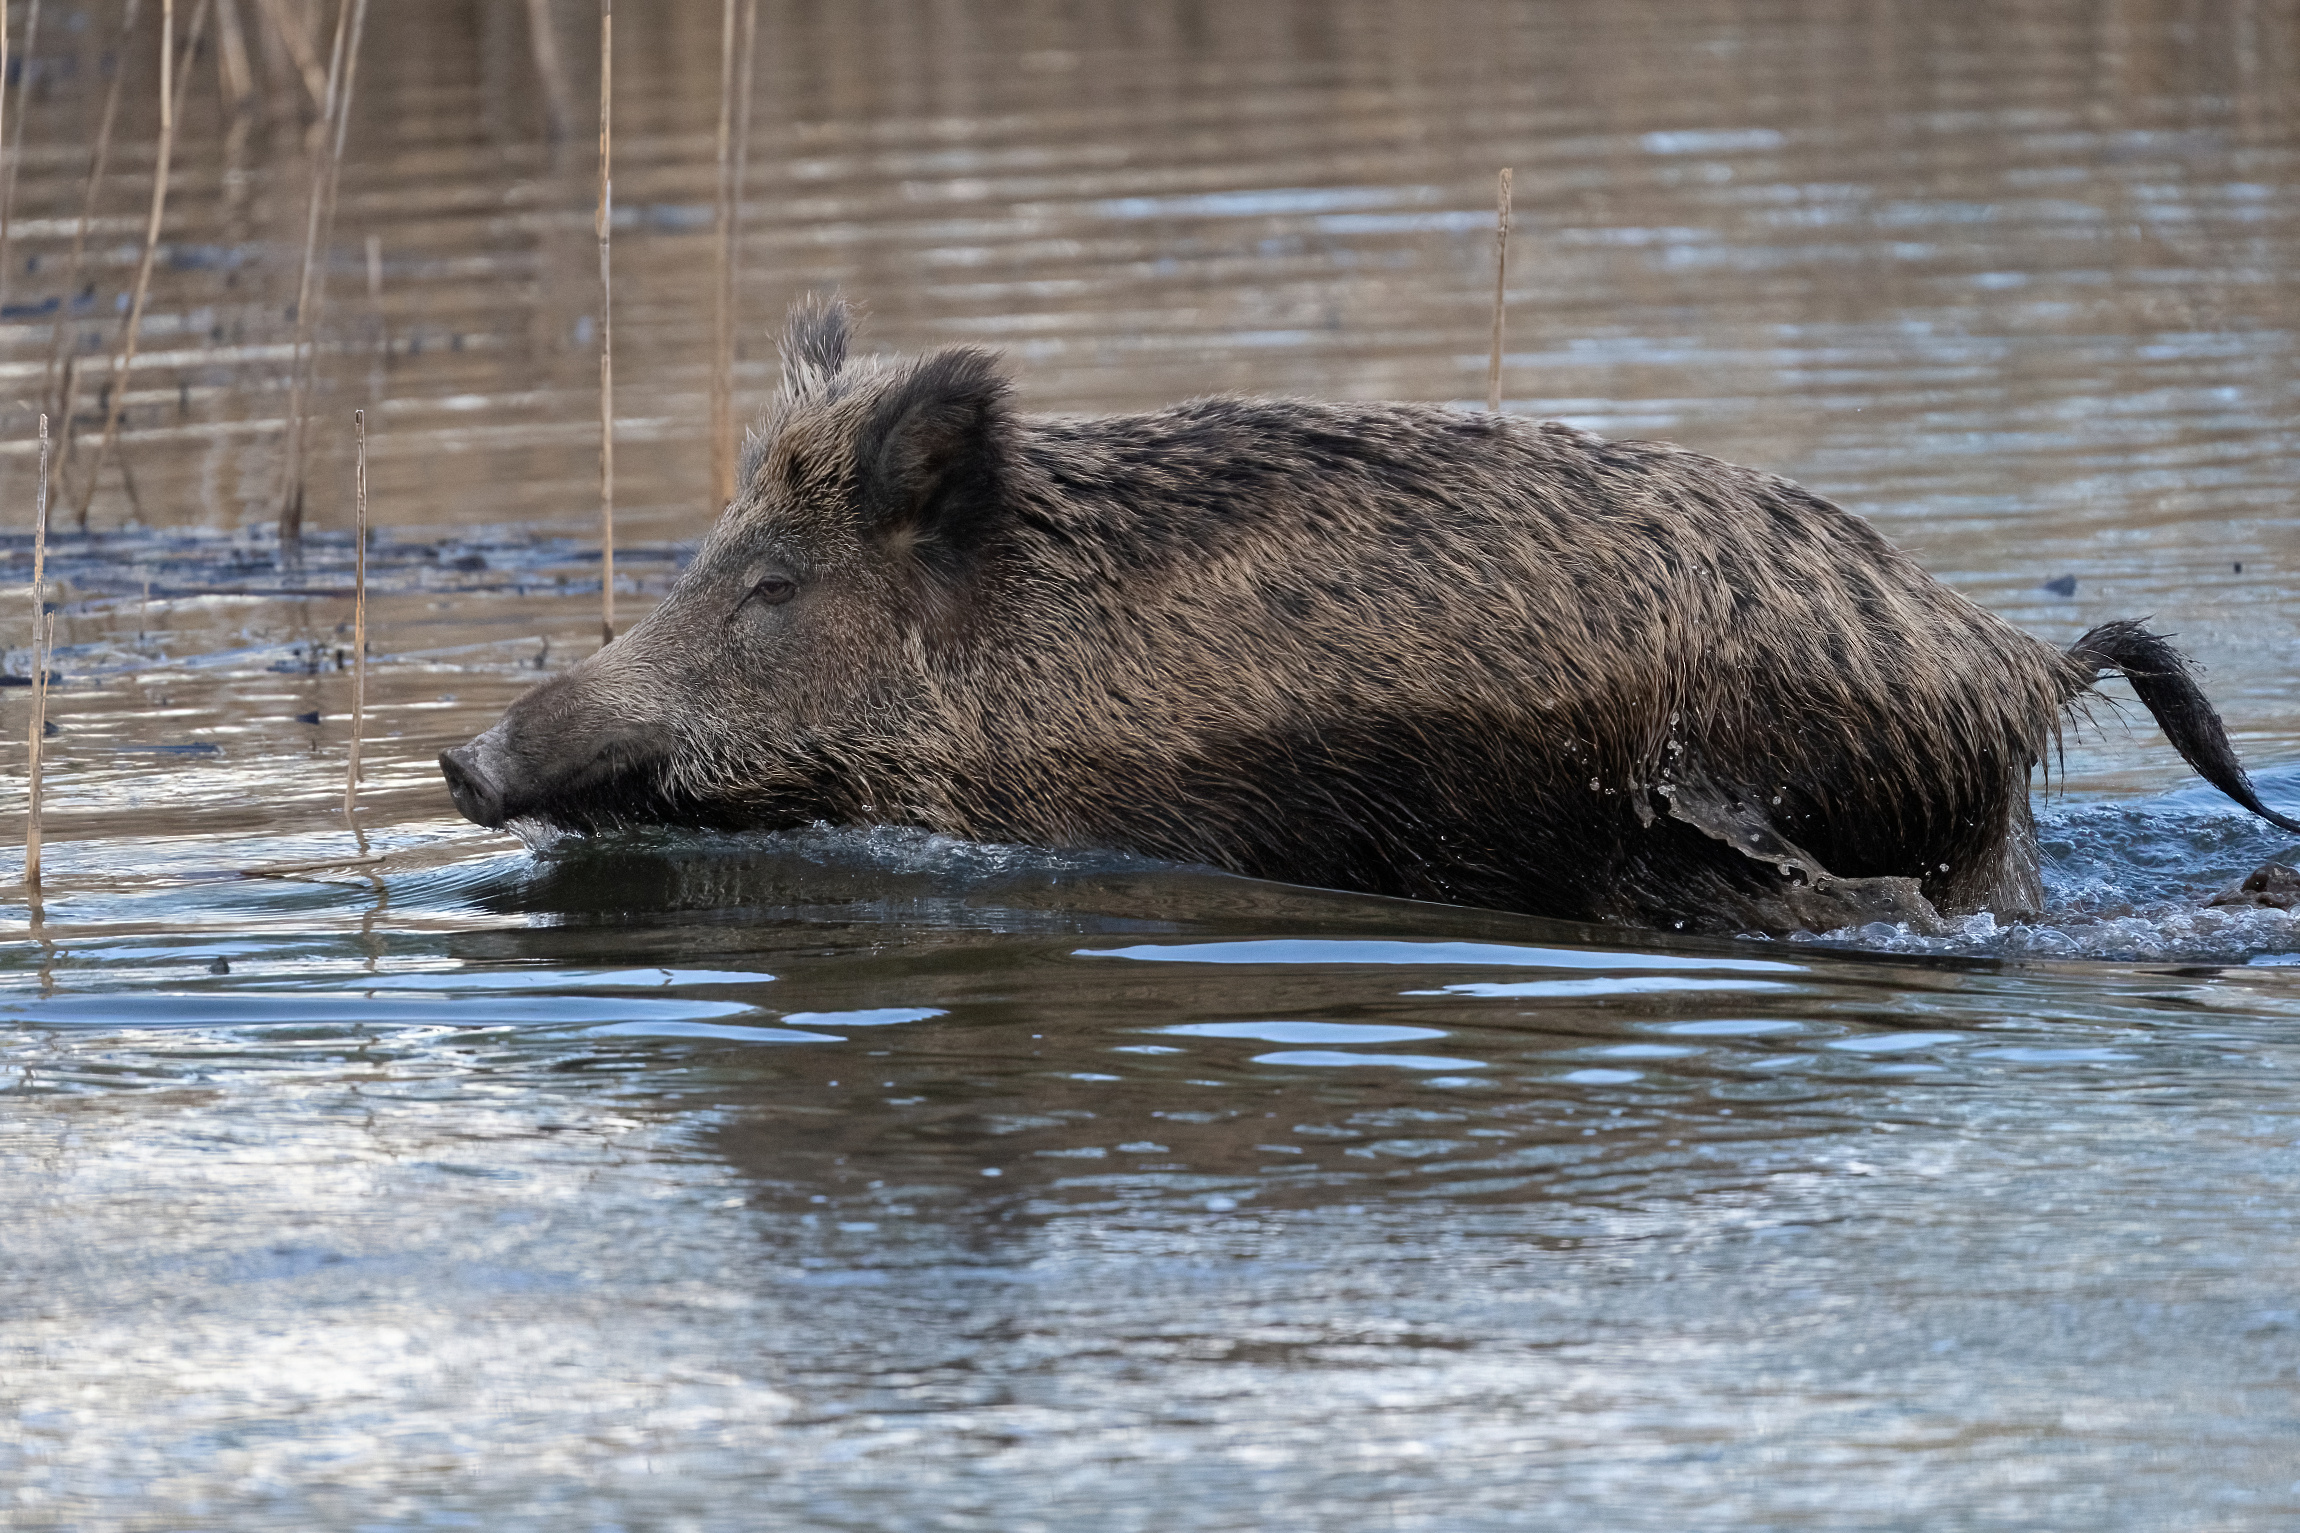 Wild boar at sunset in the swamp...